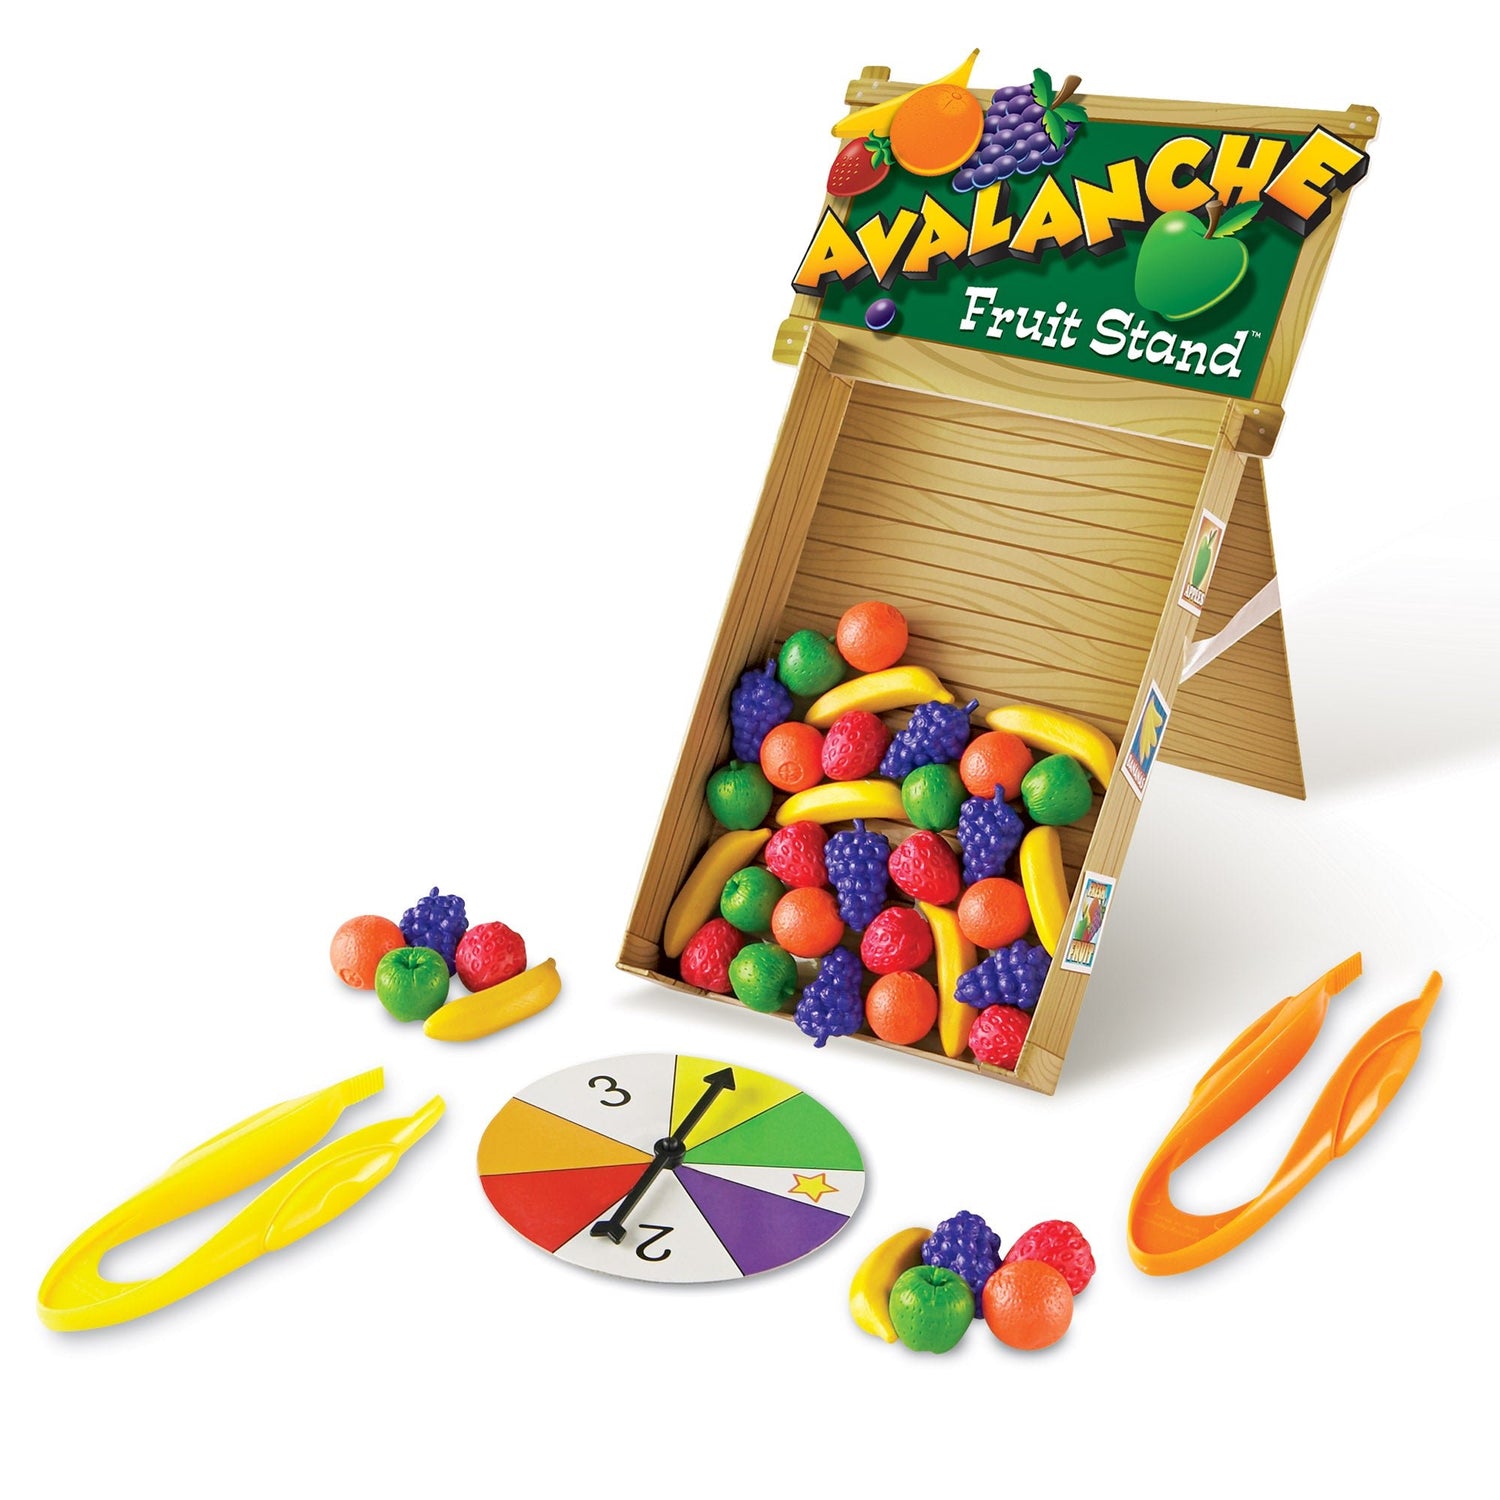 AVALANCHE FRUIT STAND™ by LEARNING RESOURCES - The Playful Collective